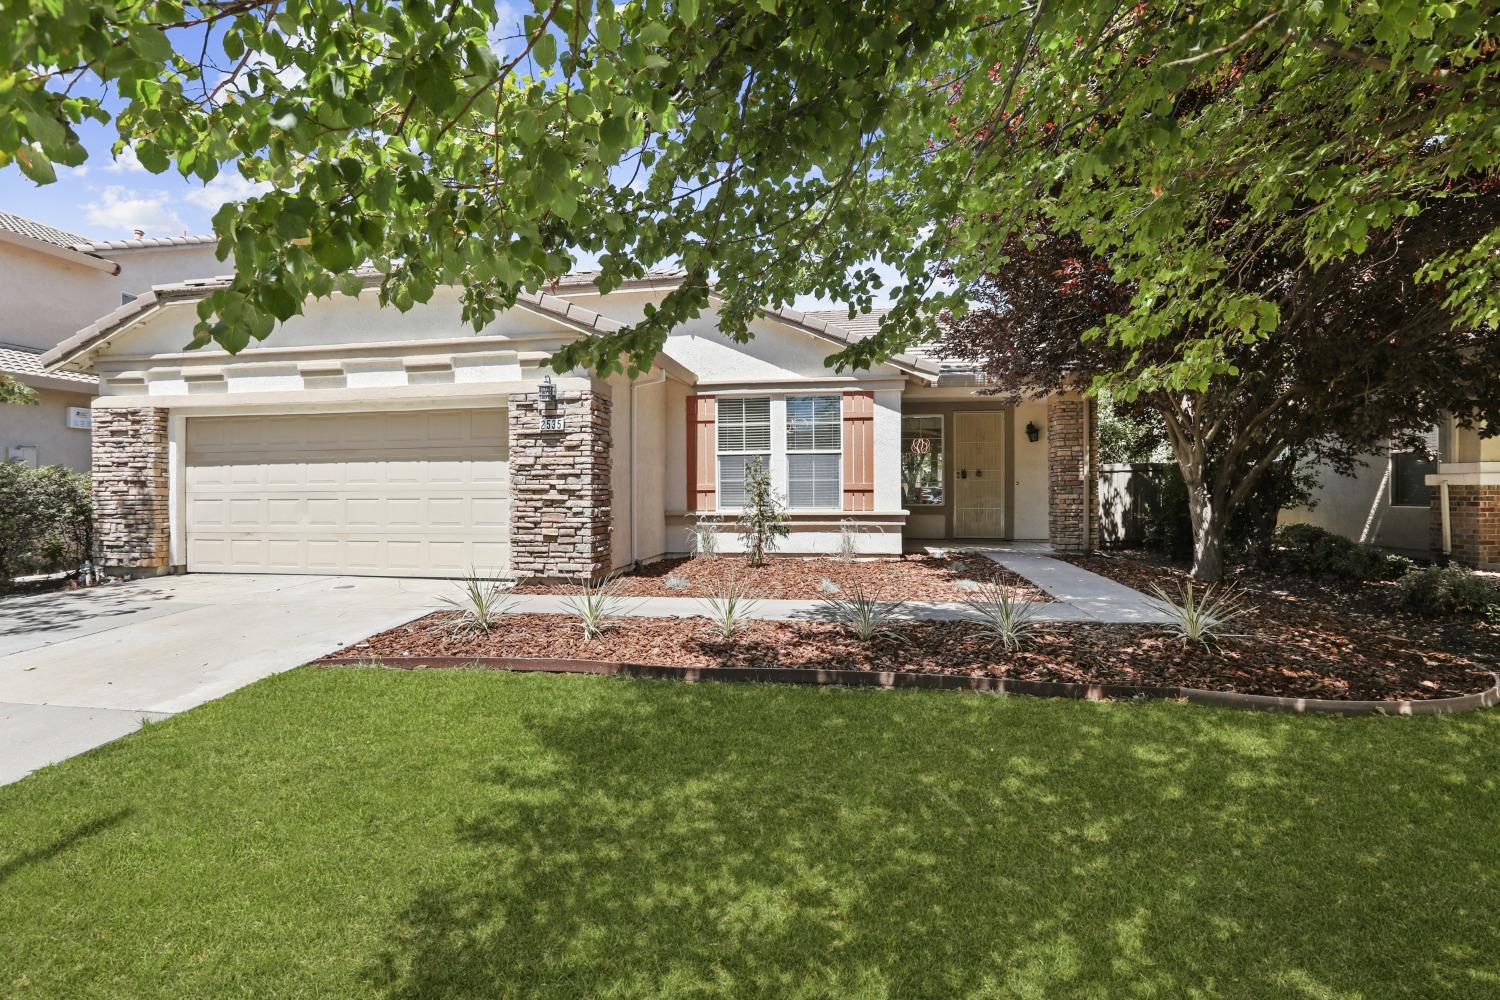 Wow- wow - wow! Fully updated single story in one of best neighborhoods of N Natomas at an amazing p